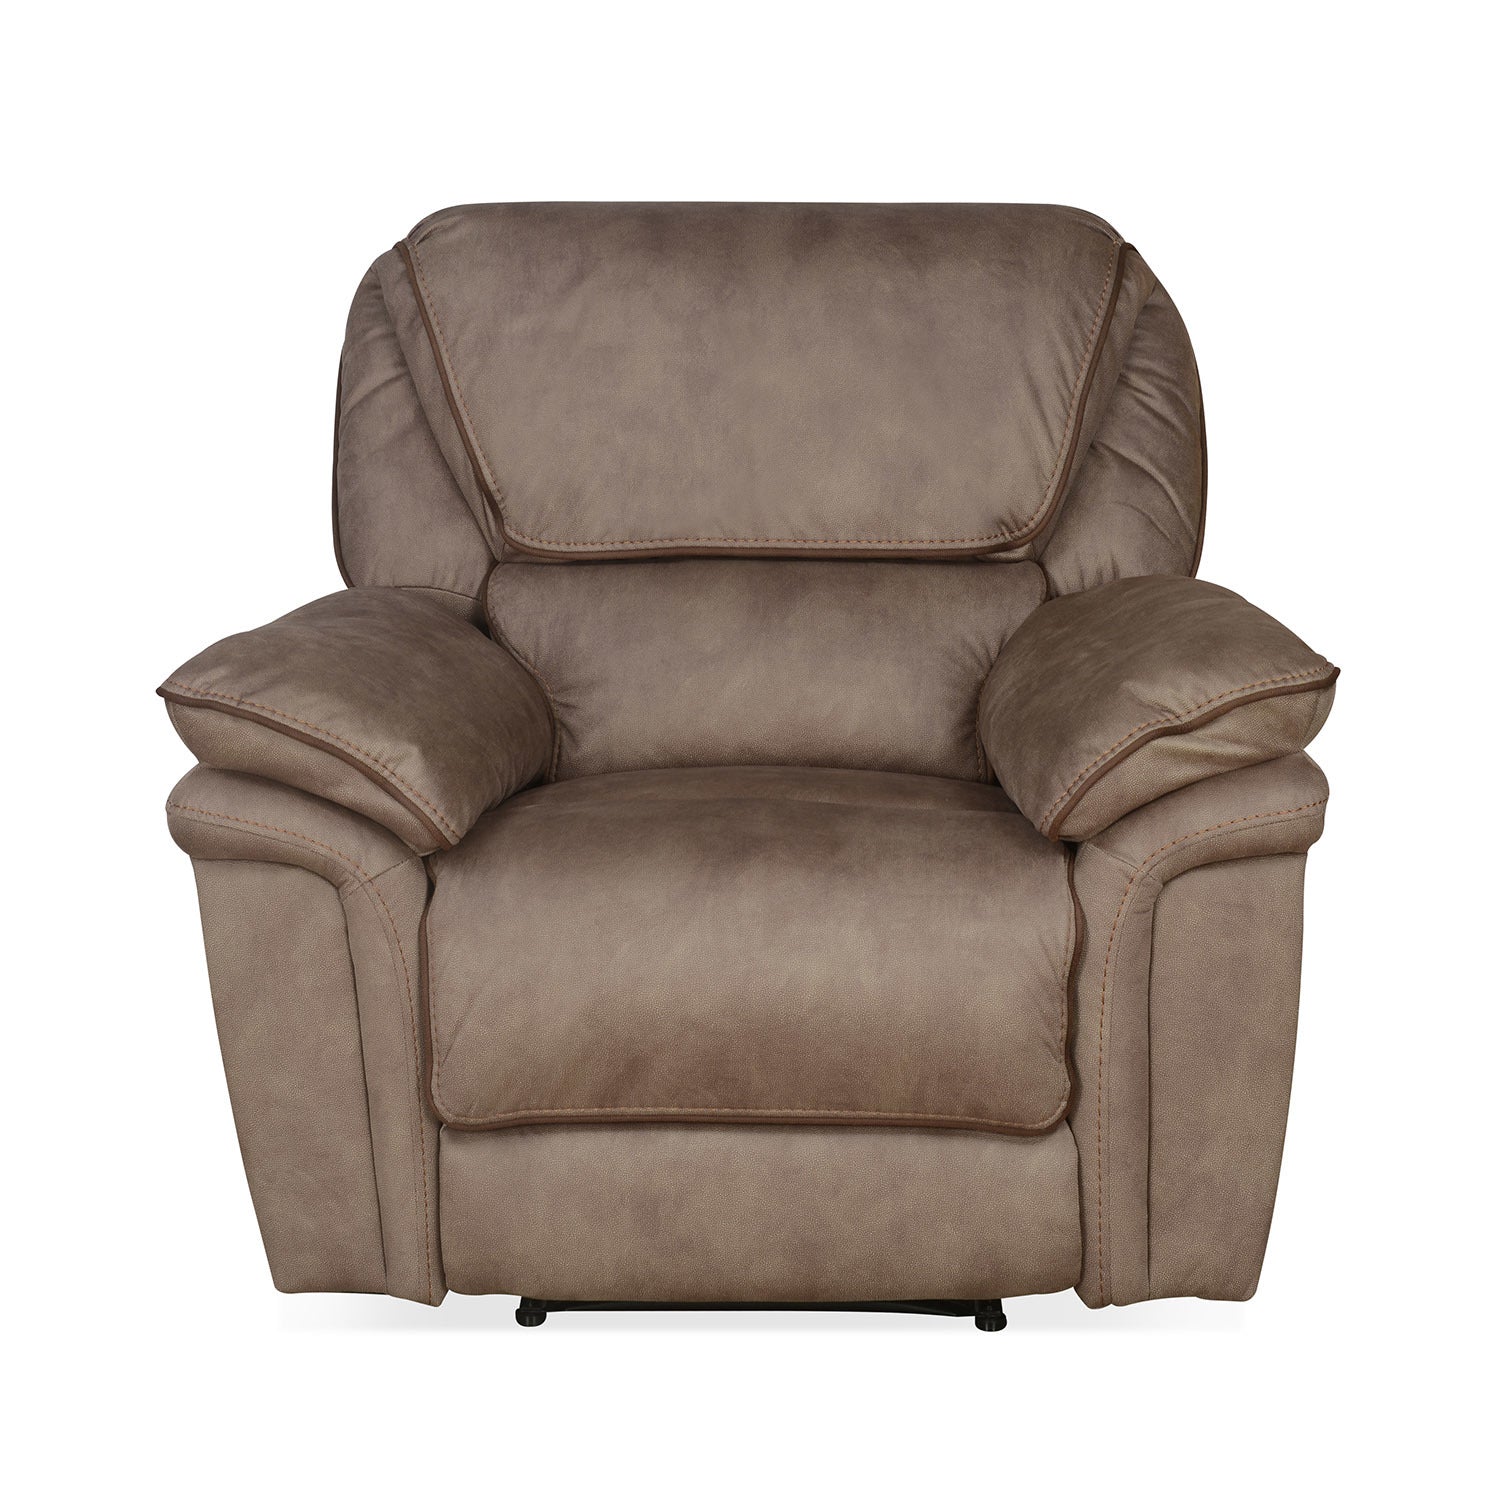 Fuzzy 1 Seater Sofa with Electric Recliner (Mocha Brown)